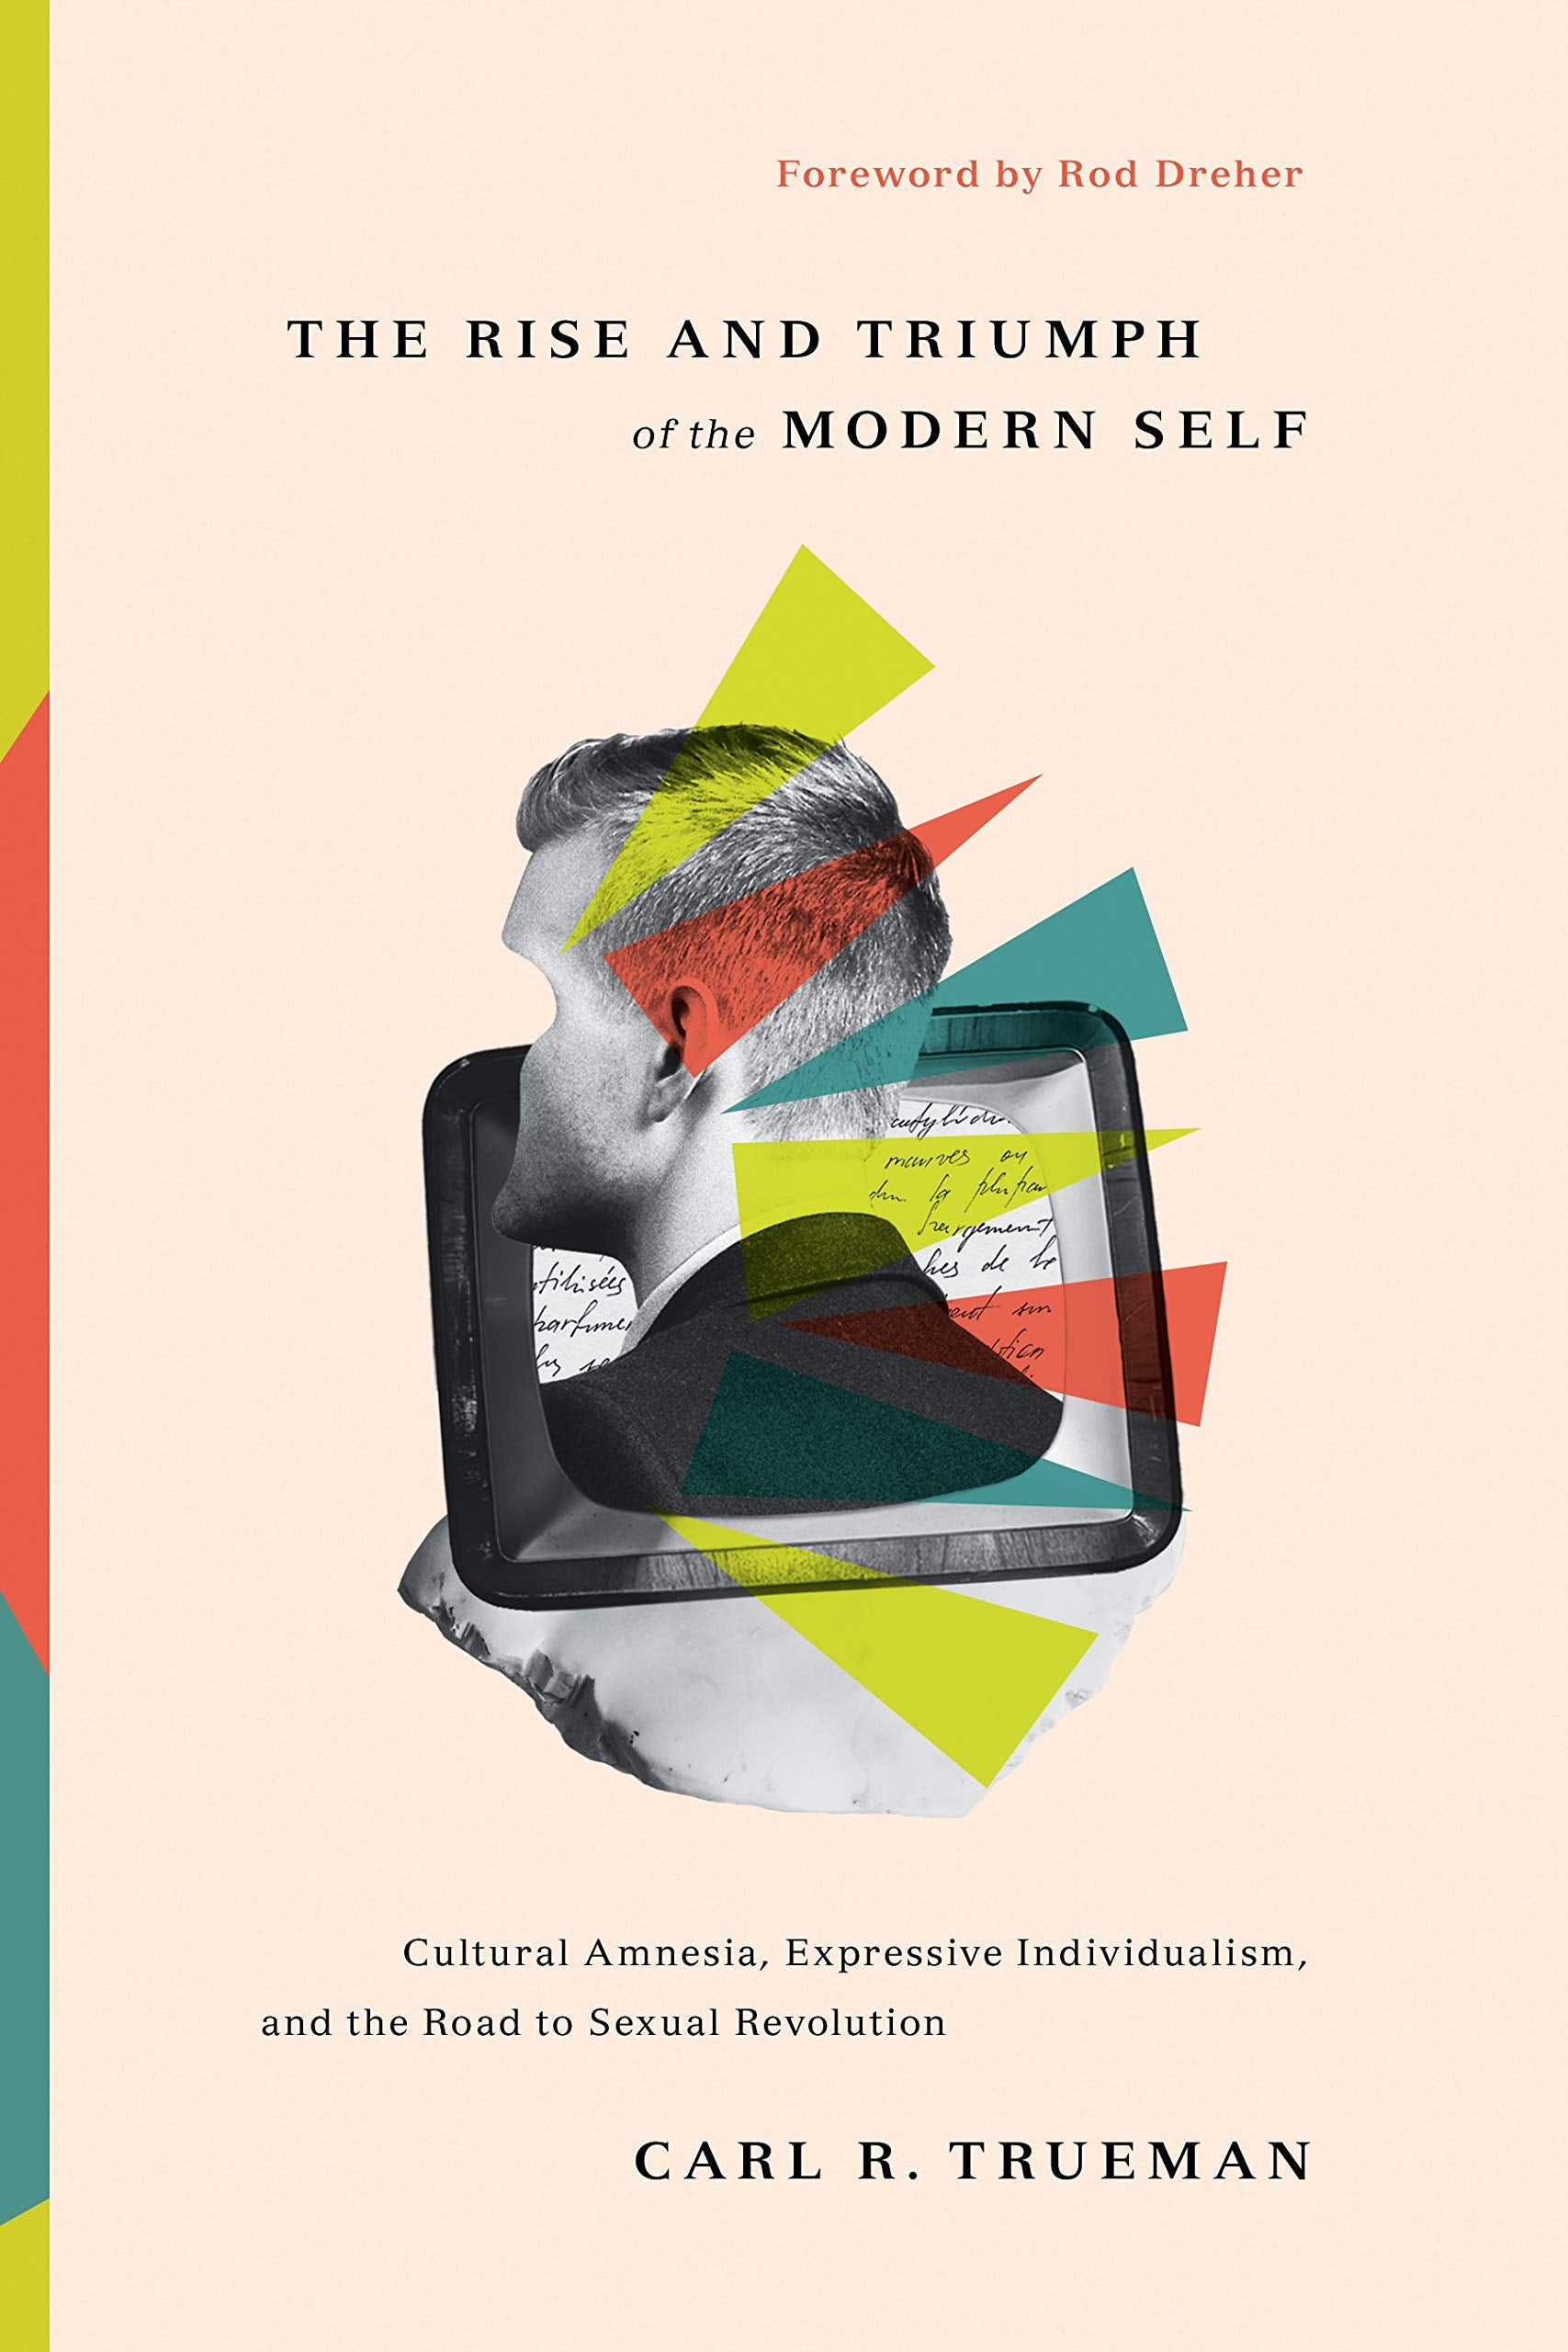 (foreword　Expressive　and　9781433556333　Dreher,　and　the　the　by)　Carl　Road　Triumph　Modern　Trueman,　Bookstore　R;　Revolution　of　Amnesia,　Individualism,　Self:　Cultural　Sexual　to　Westminster　Rod　–　The　Rise